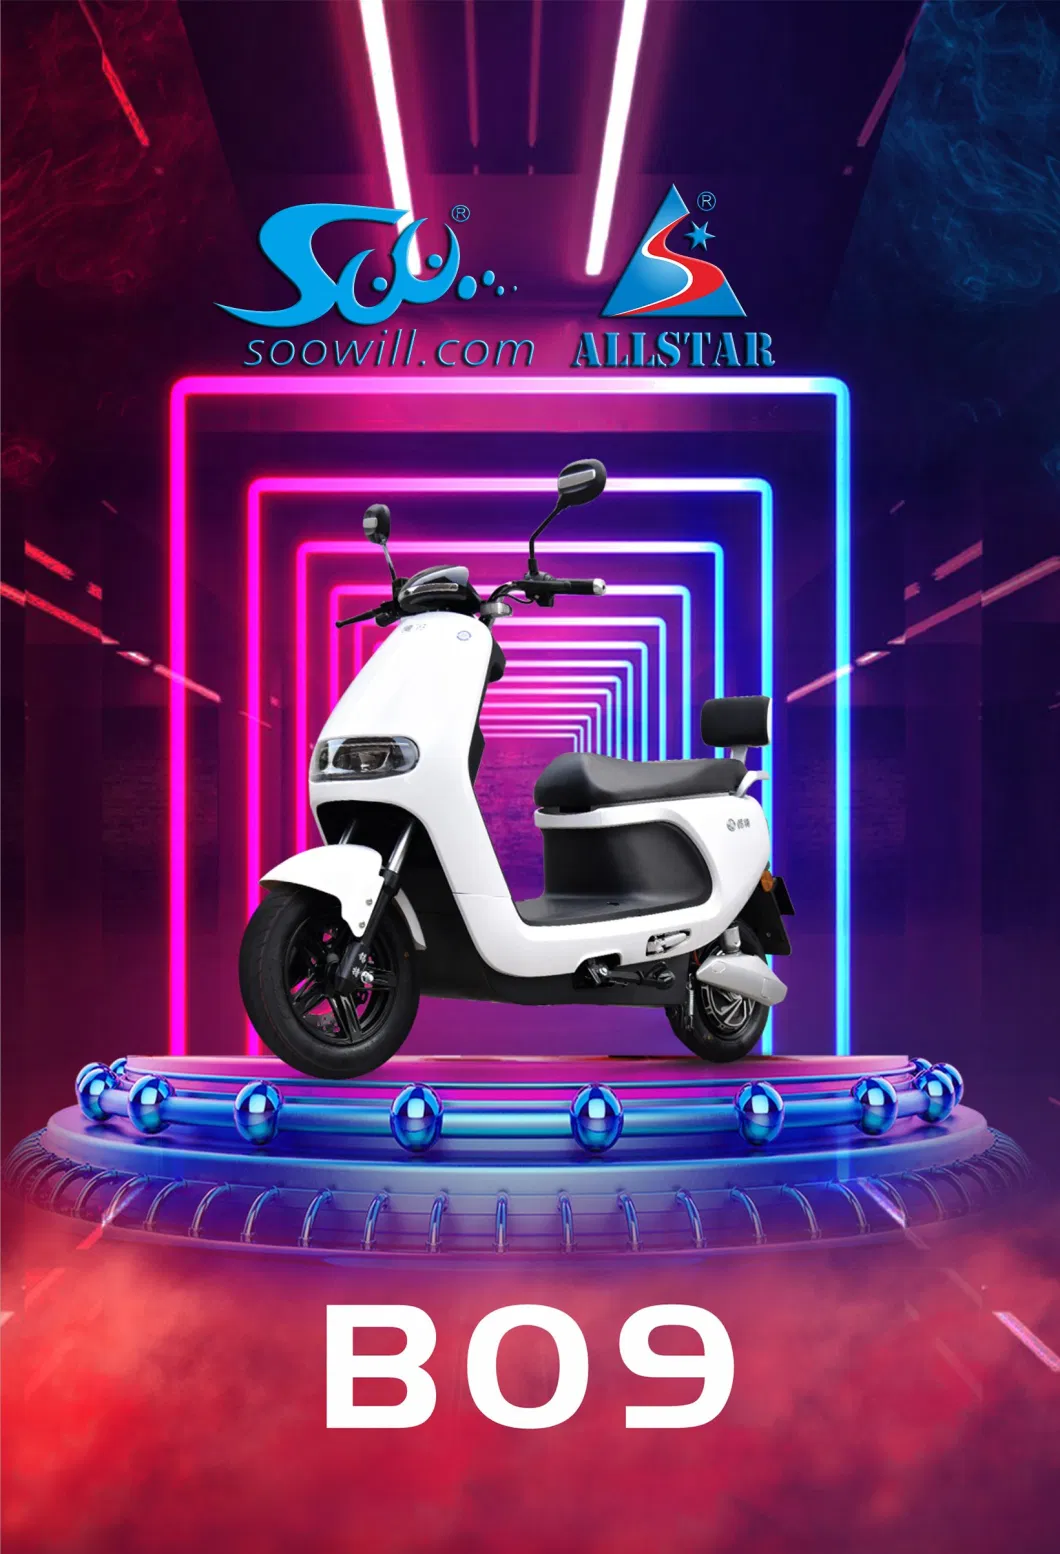 China Factory Seller Wholesale 10 Inch Adult Mod Coversion Scooter with Cheap Price 6-8h Charging Time Electric Motorcycle